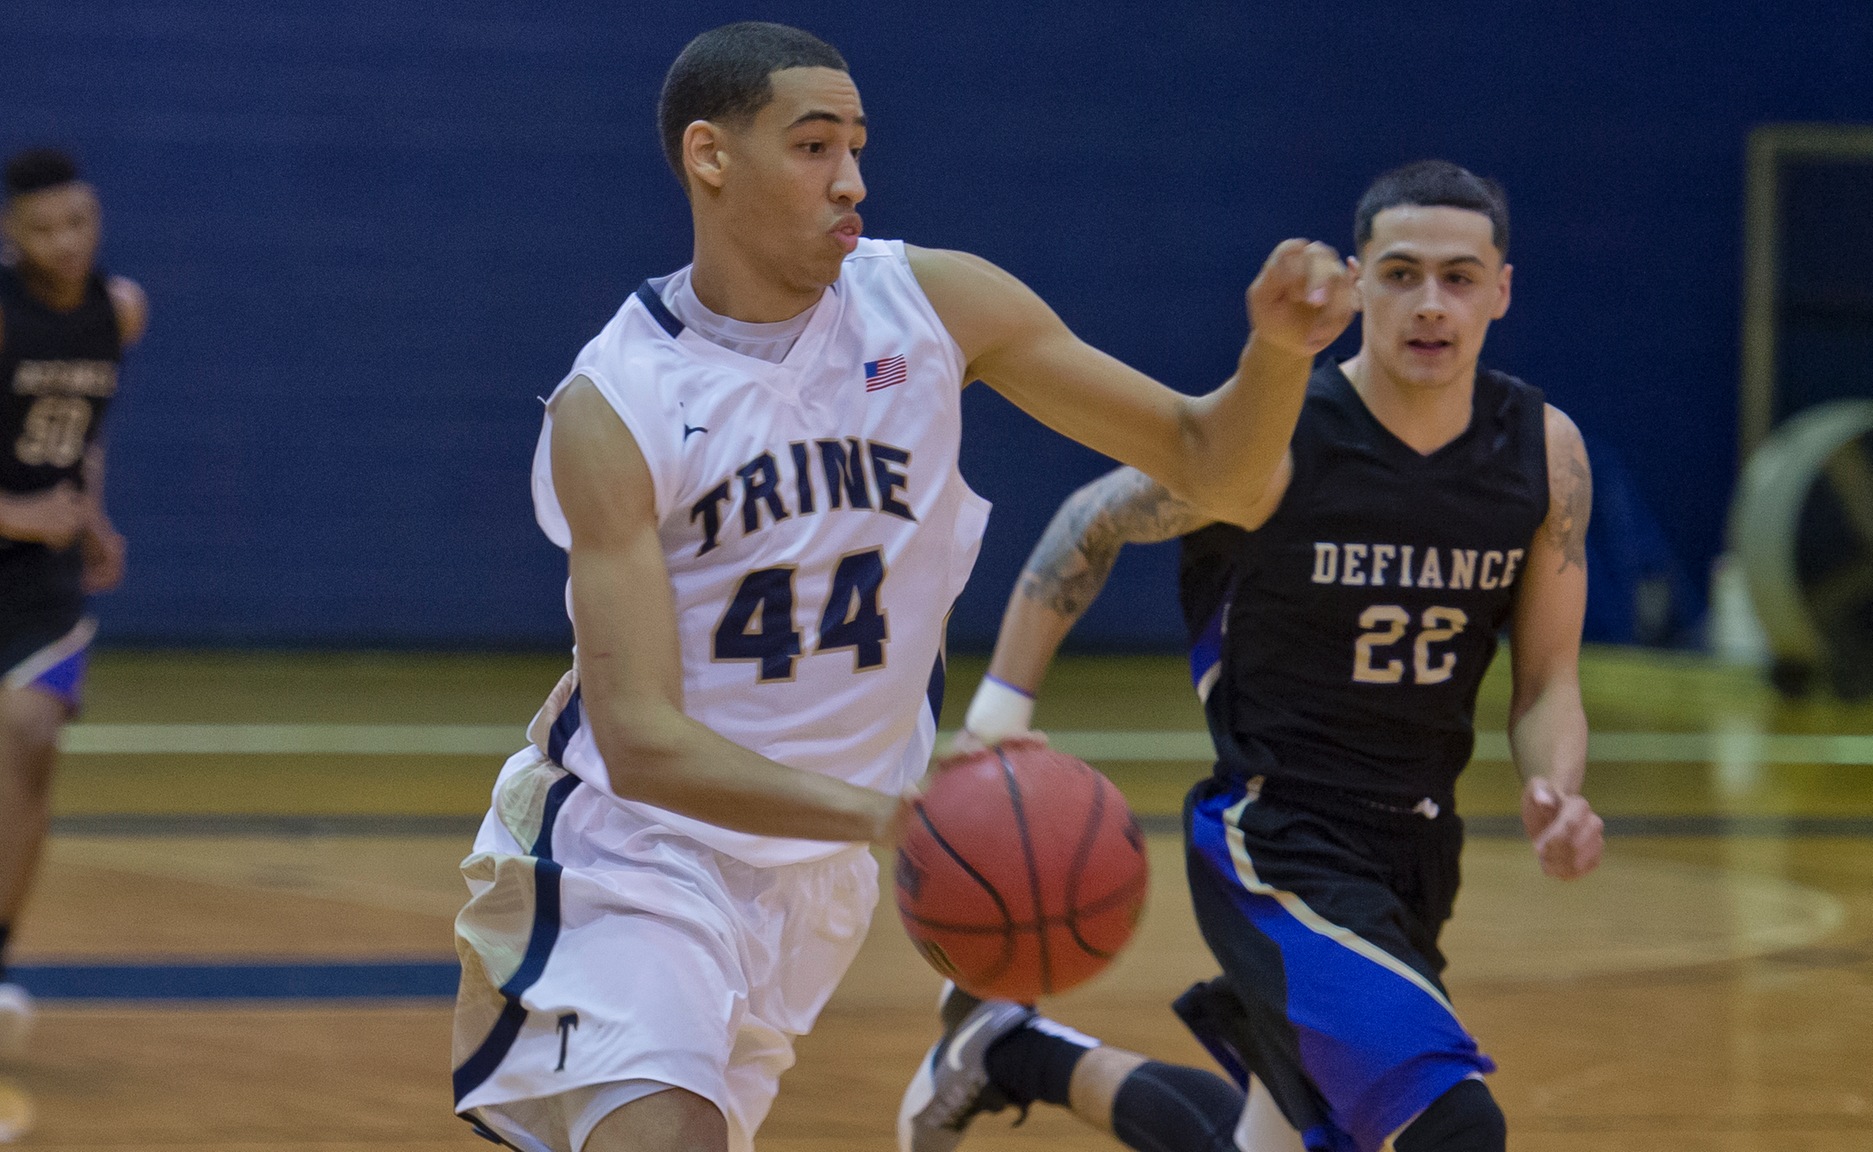 Copeland Overcoming Obstacles to Contribute for Trine